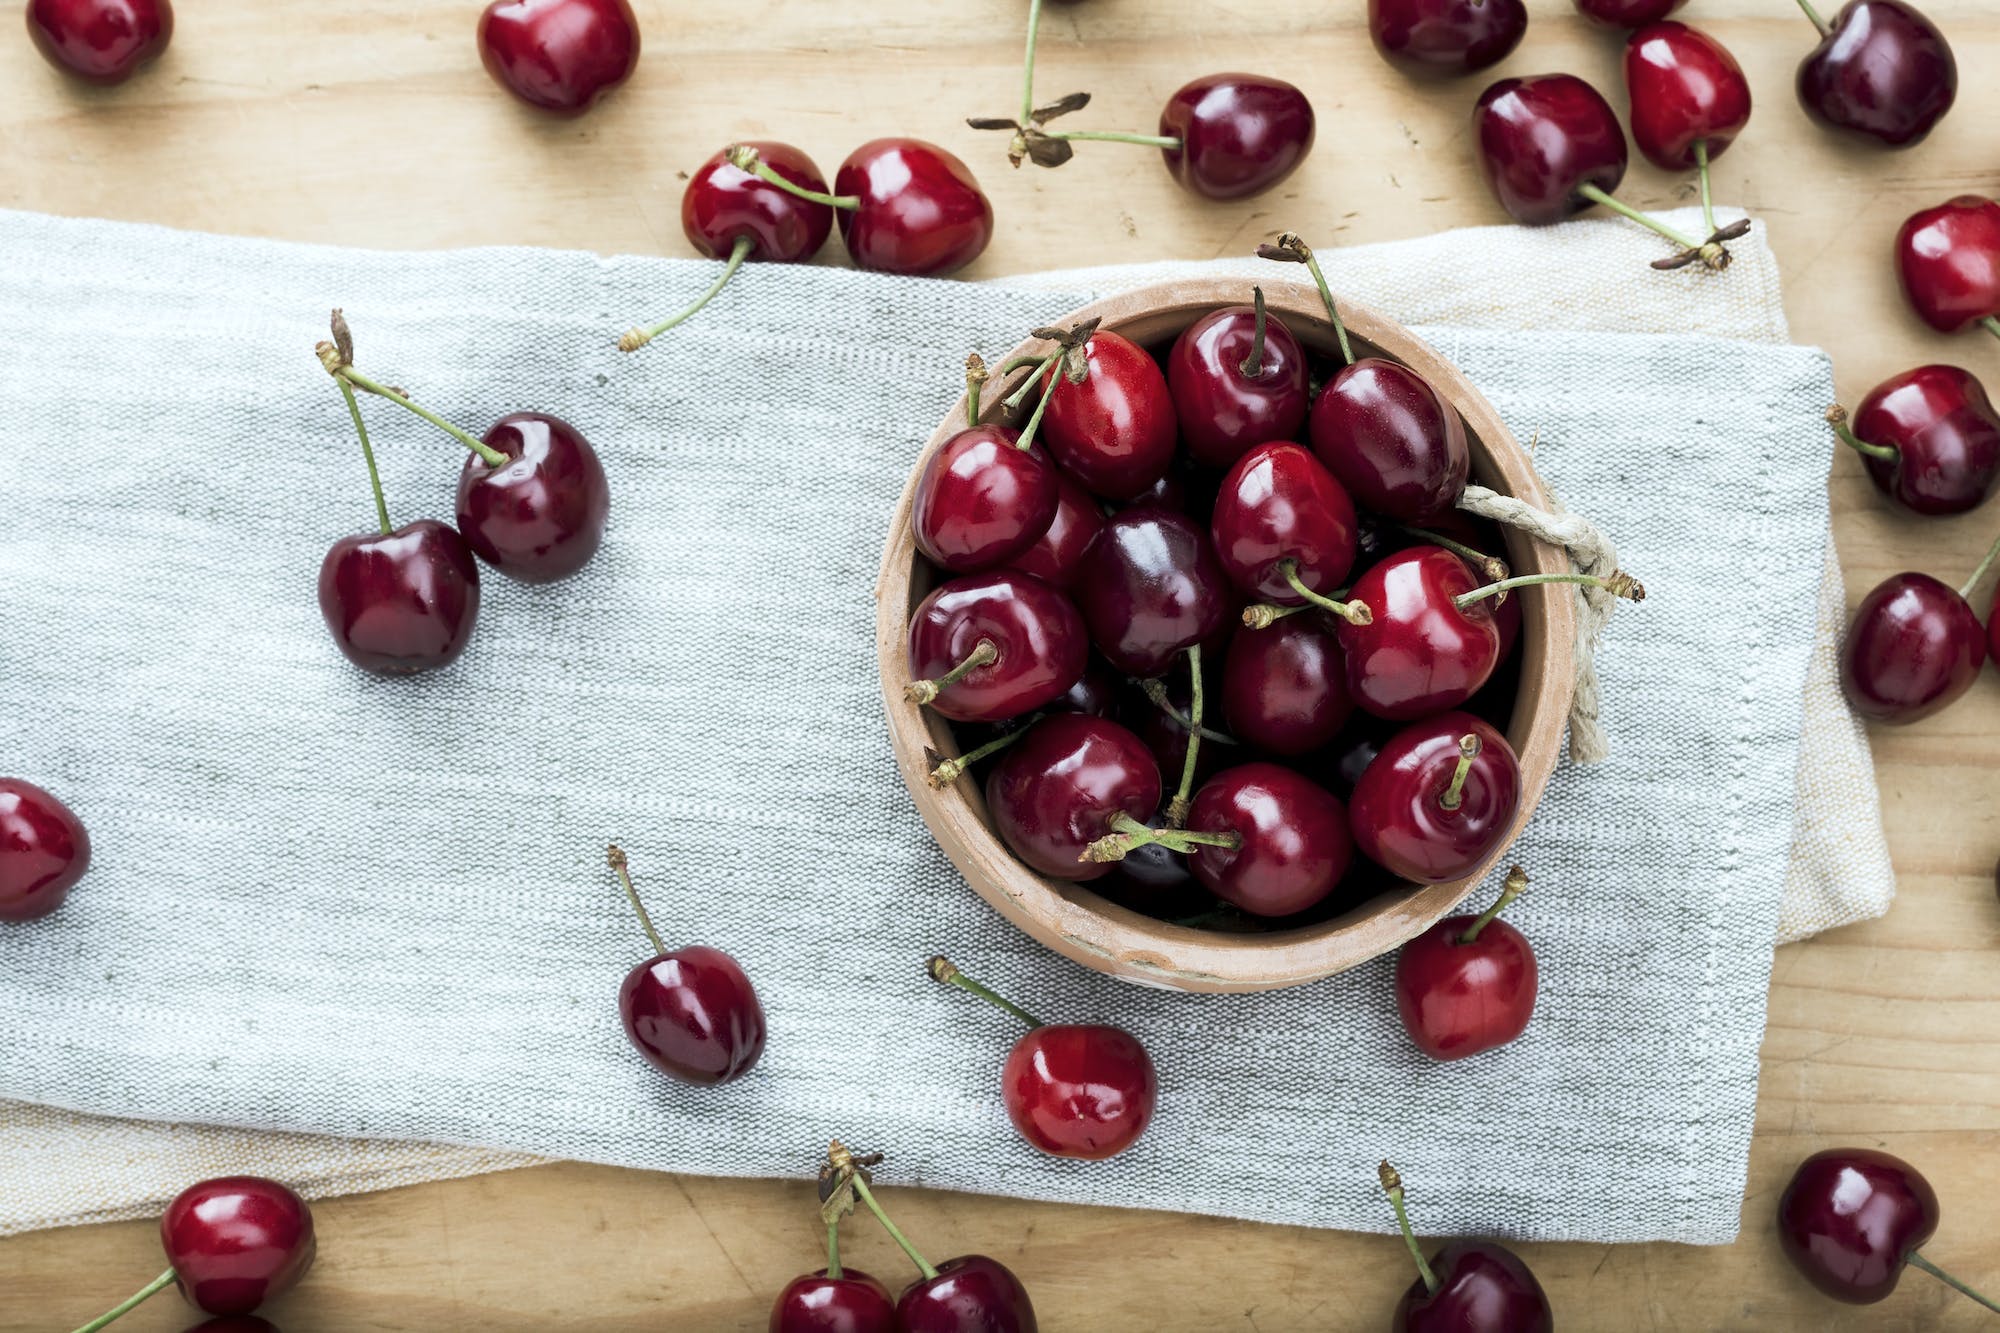 Promising New Research on Tart Cherry and Endurance